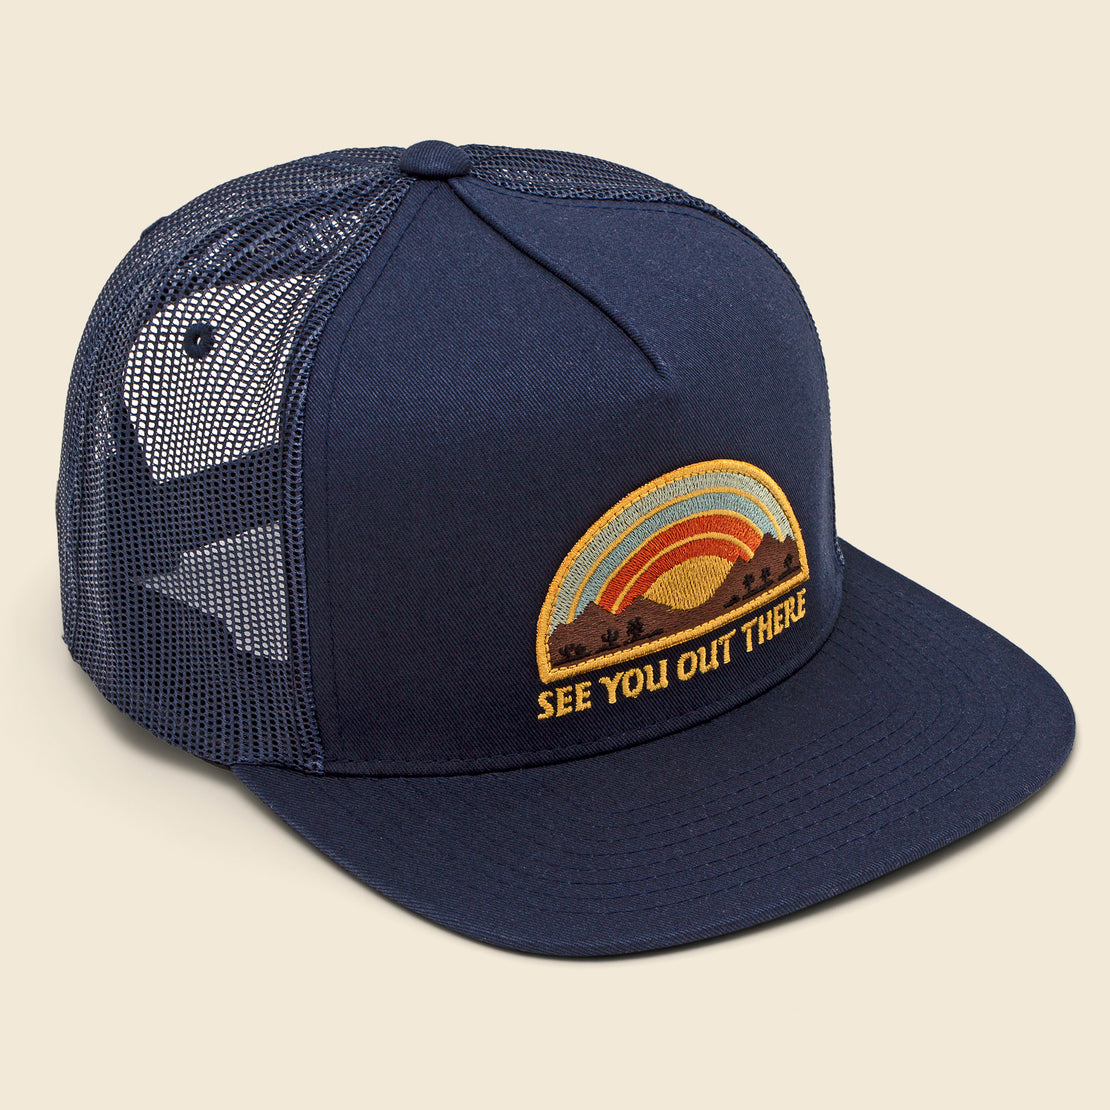 Katin See You Out There Trucker Hat - Navy